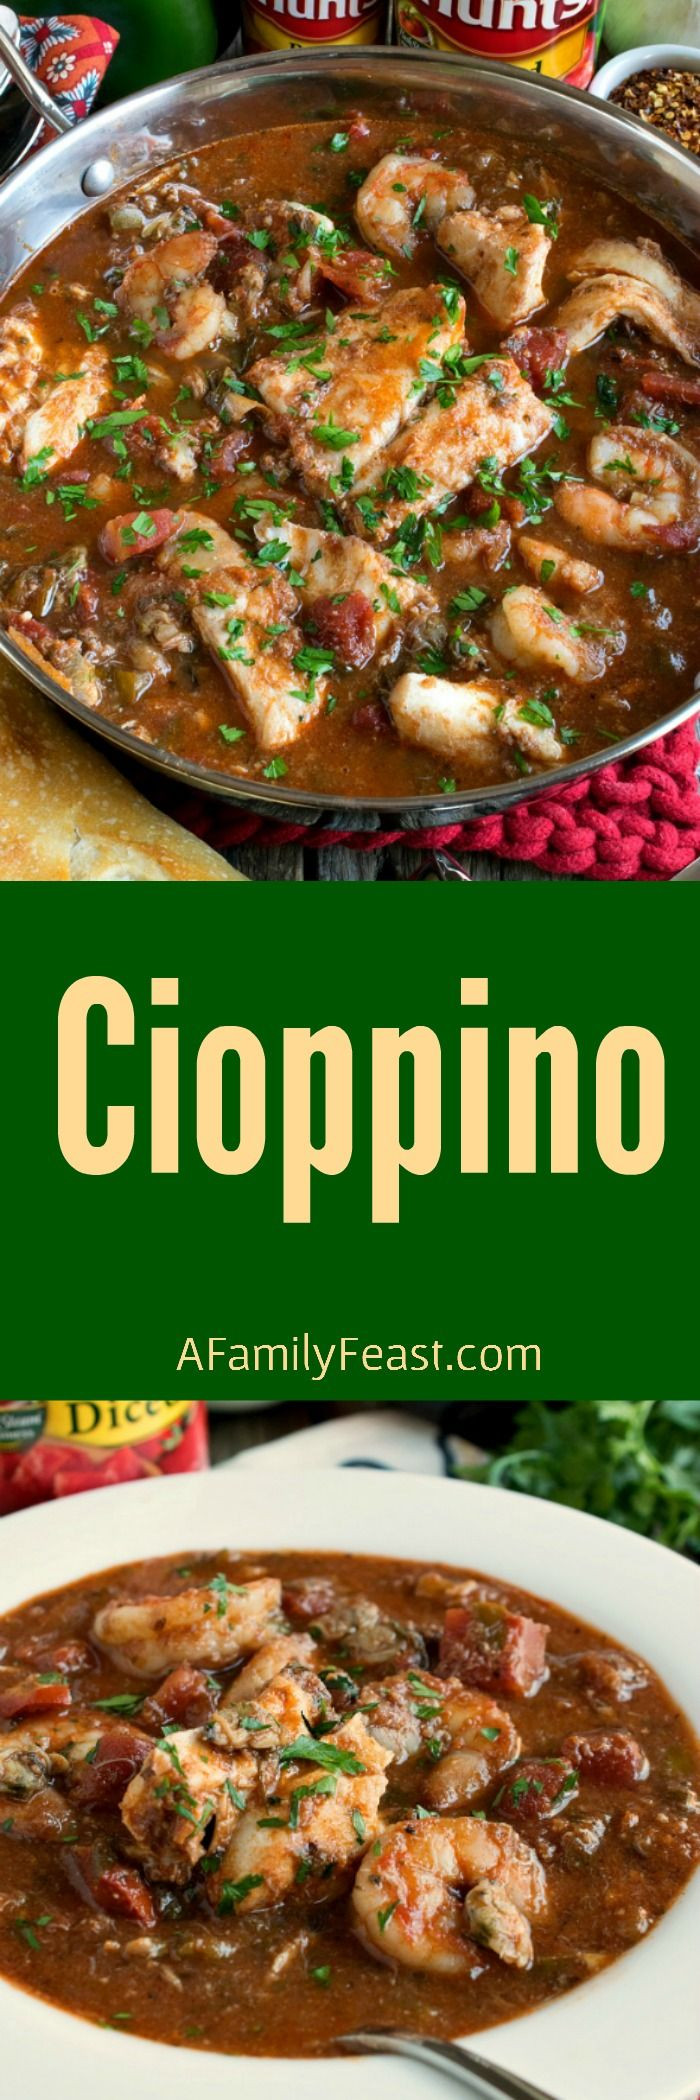 Tomato Based Seafood Stew
 Cioppino A classic Italian tomato based "Catch of the